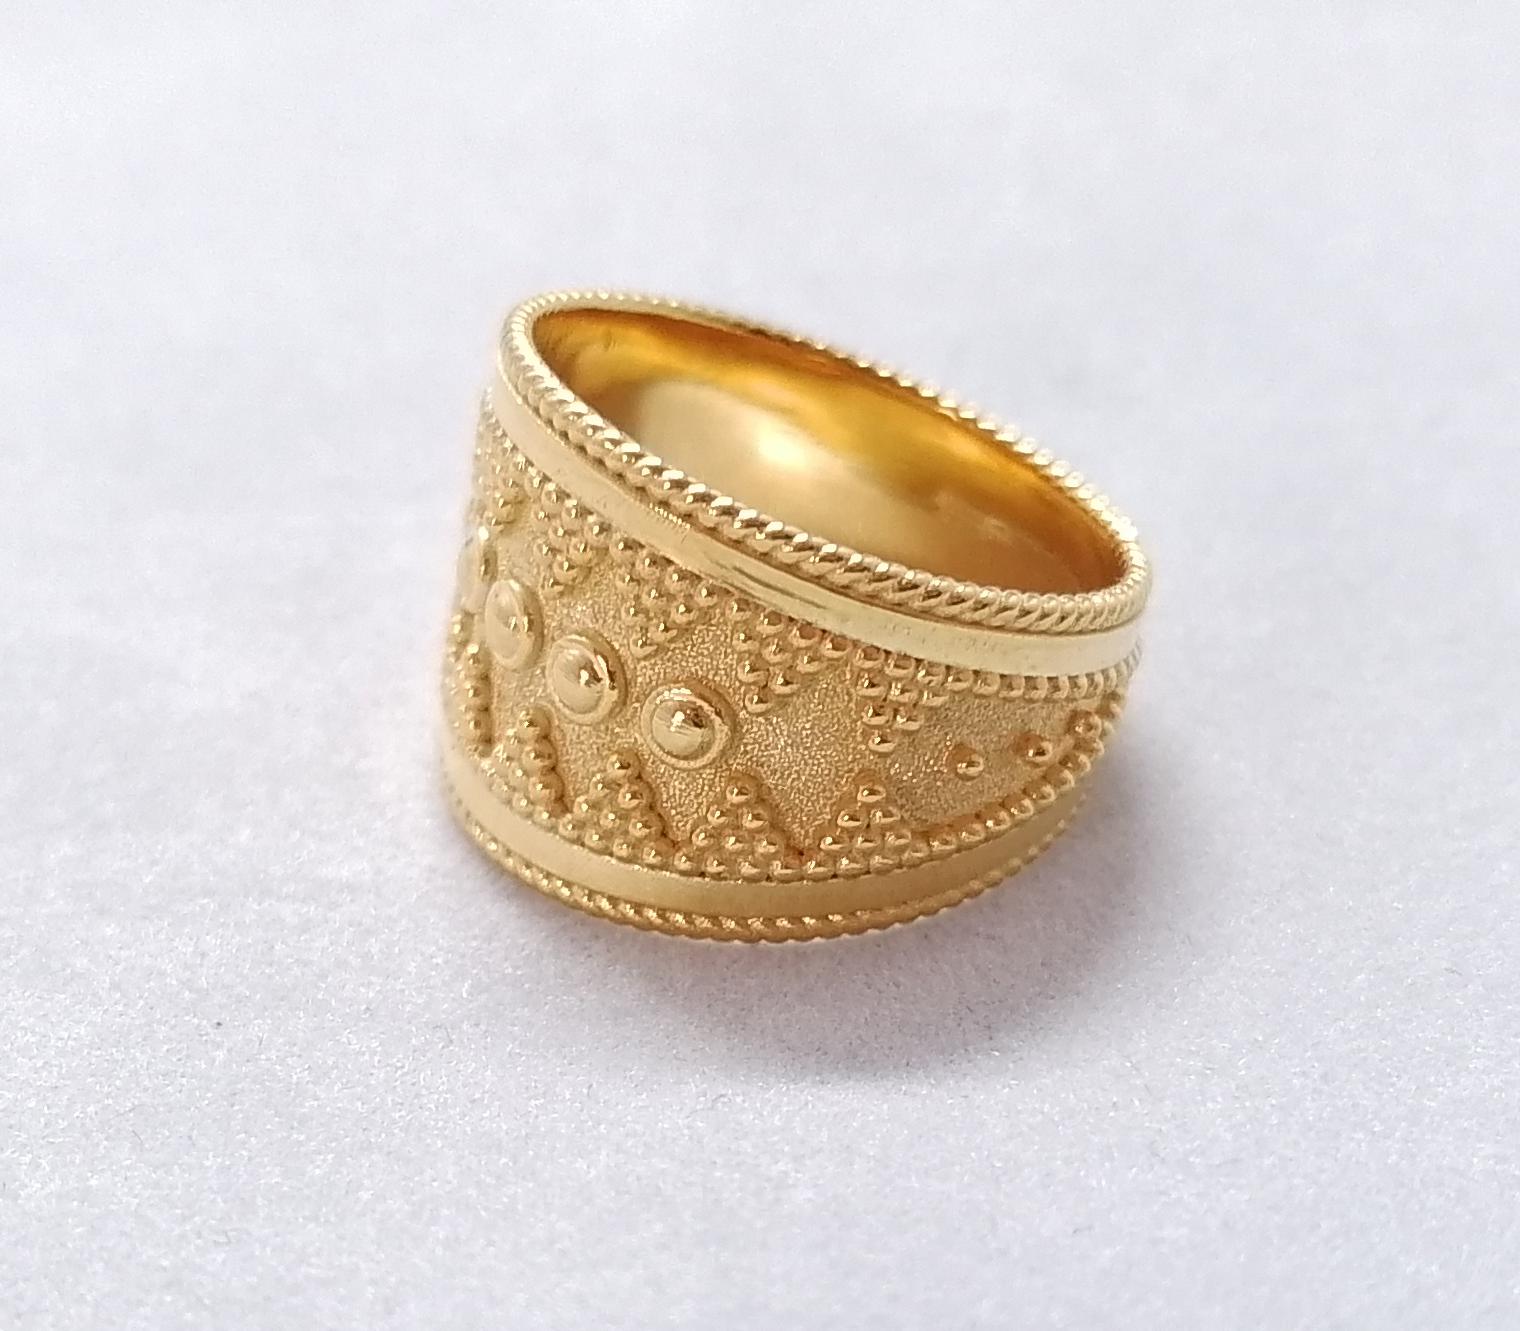 This S.Georgios designer wide band ring is made from solid 18 Karat Yellow Gold and is microscopically decorated with handmade granulation work to create a stunning and elegant art piece. We have finished this beautiful band with a stunning unique